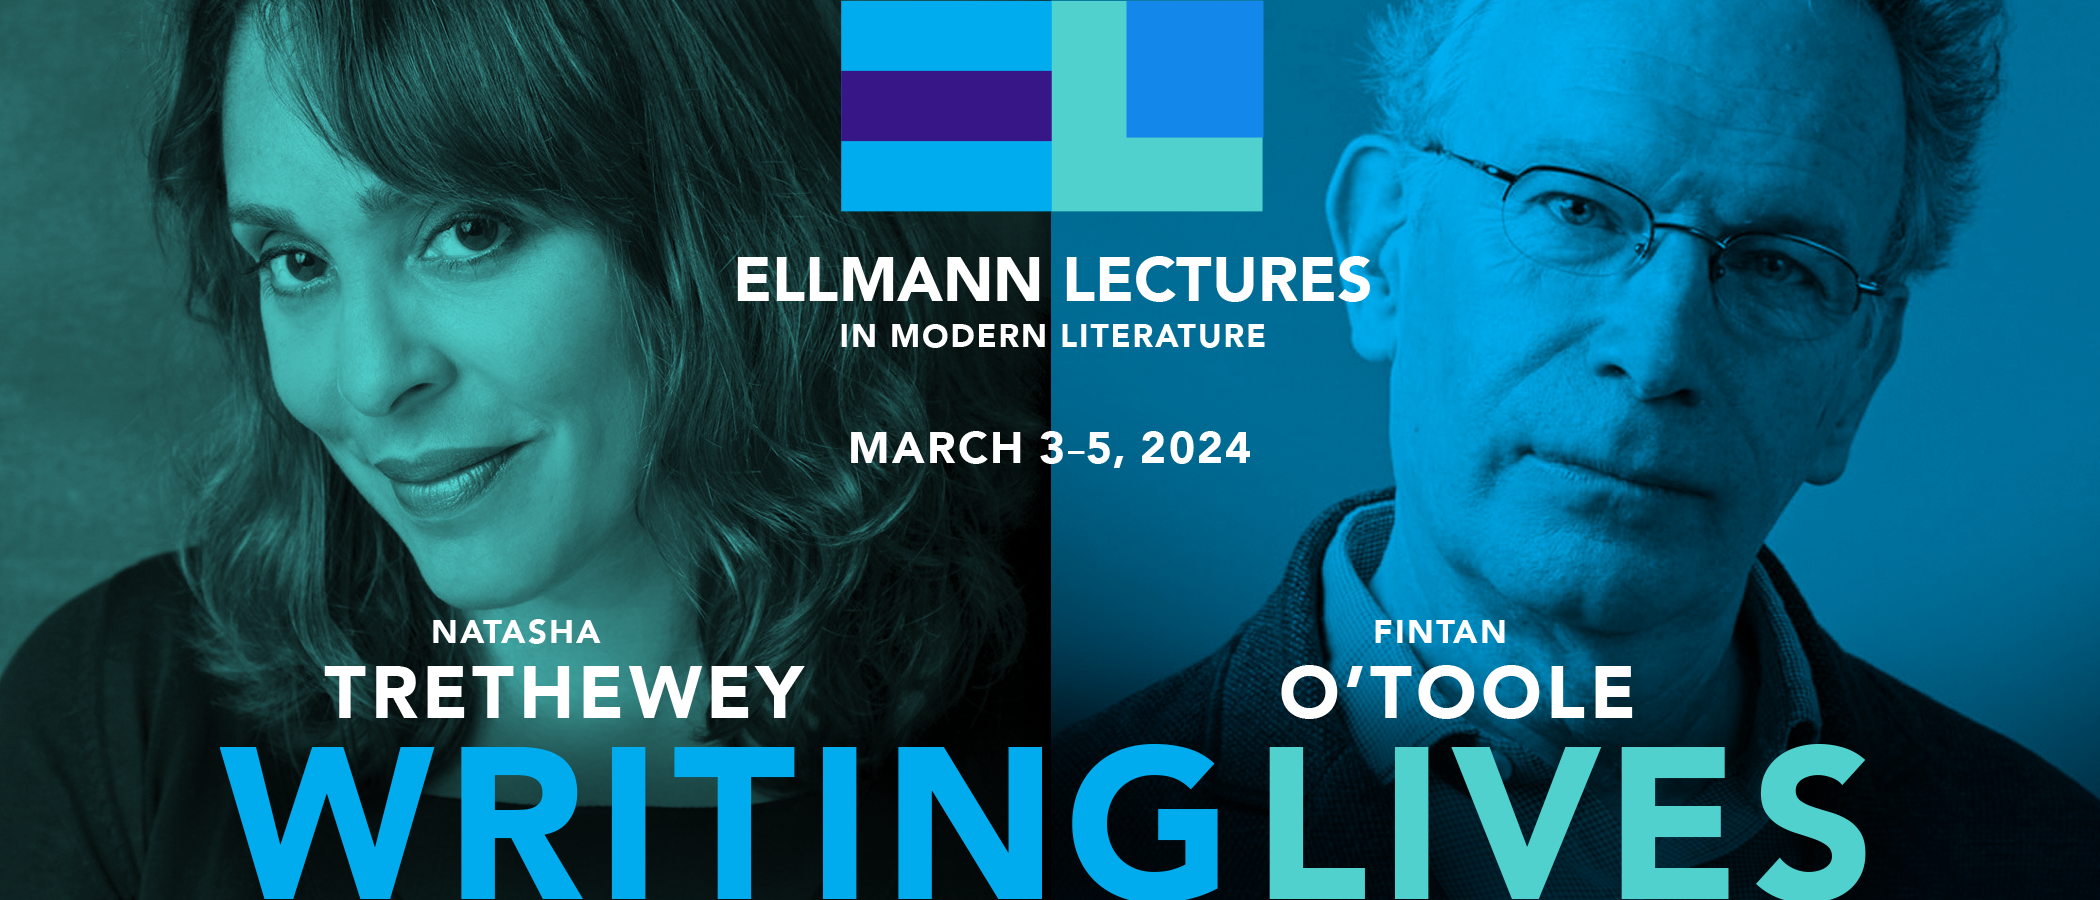 Ellmann Lectures 2024, Writing Lives, March 3 - 5